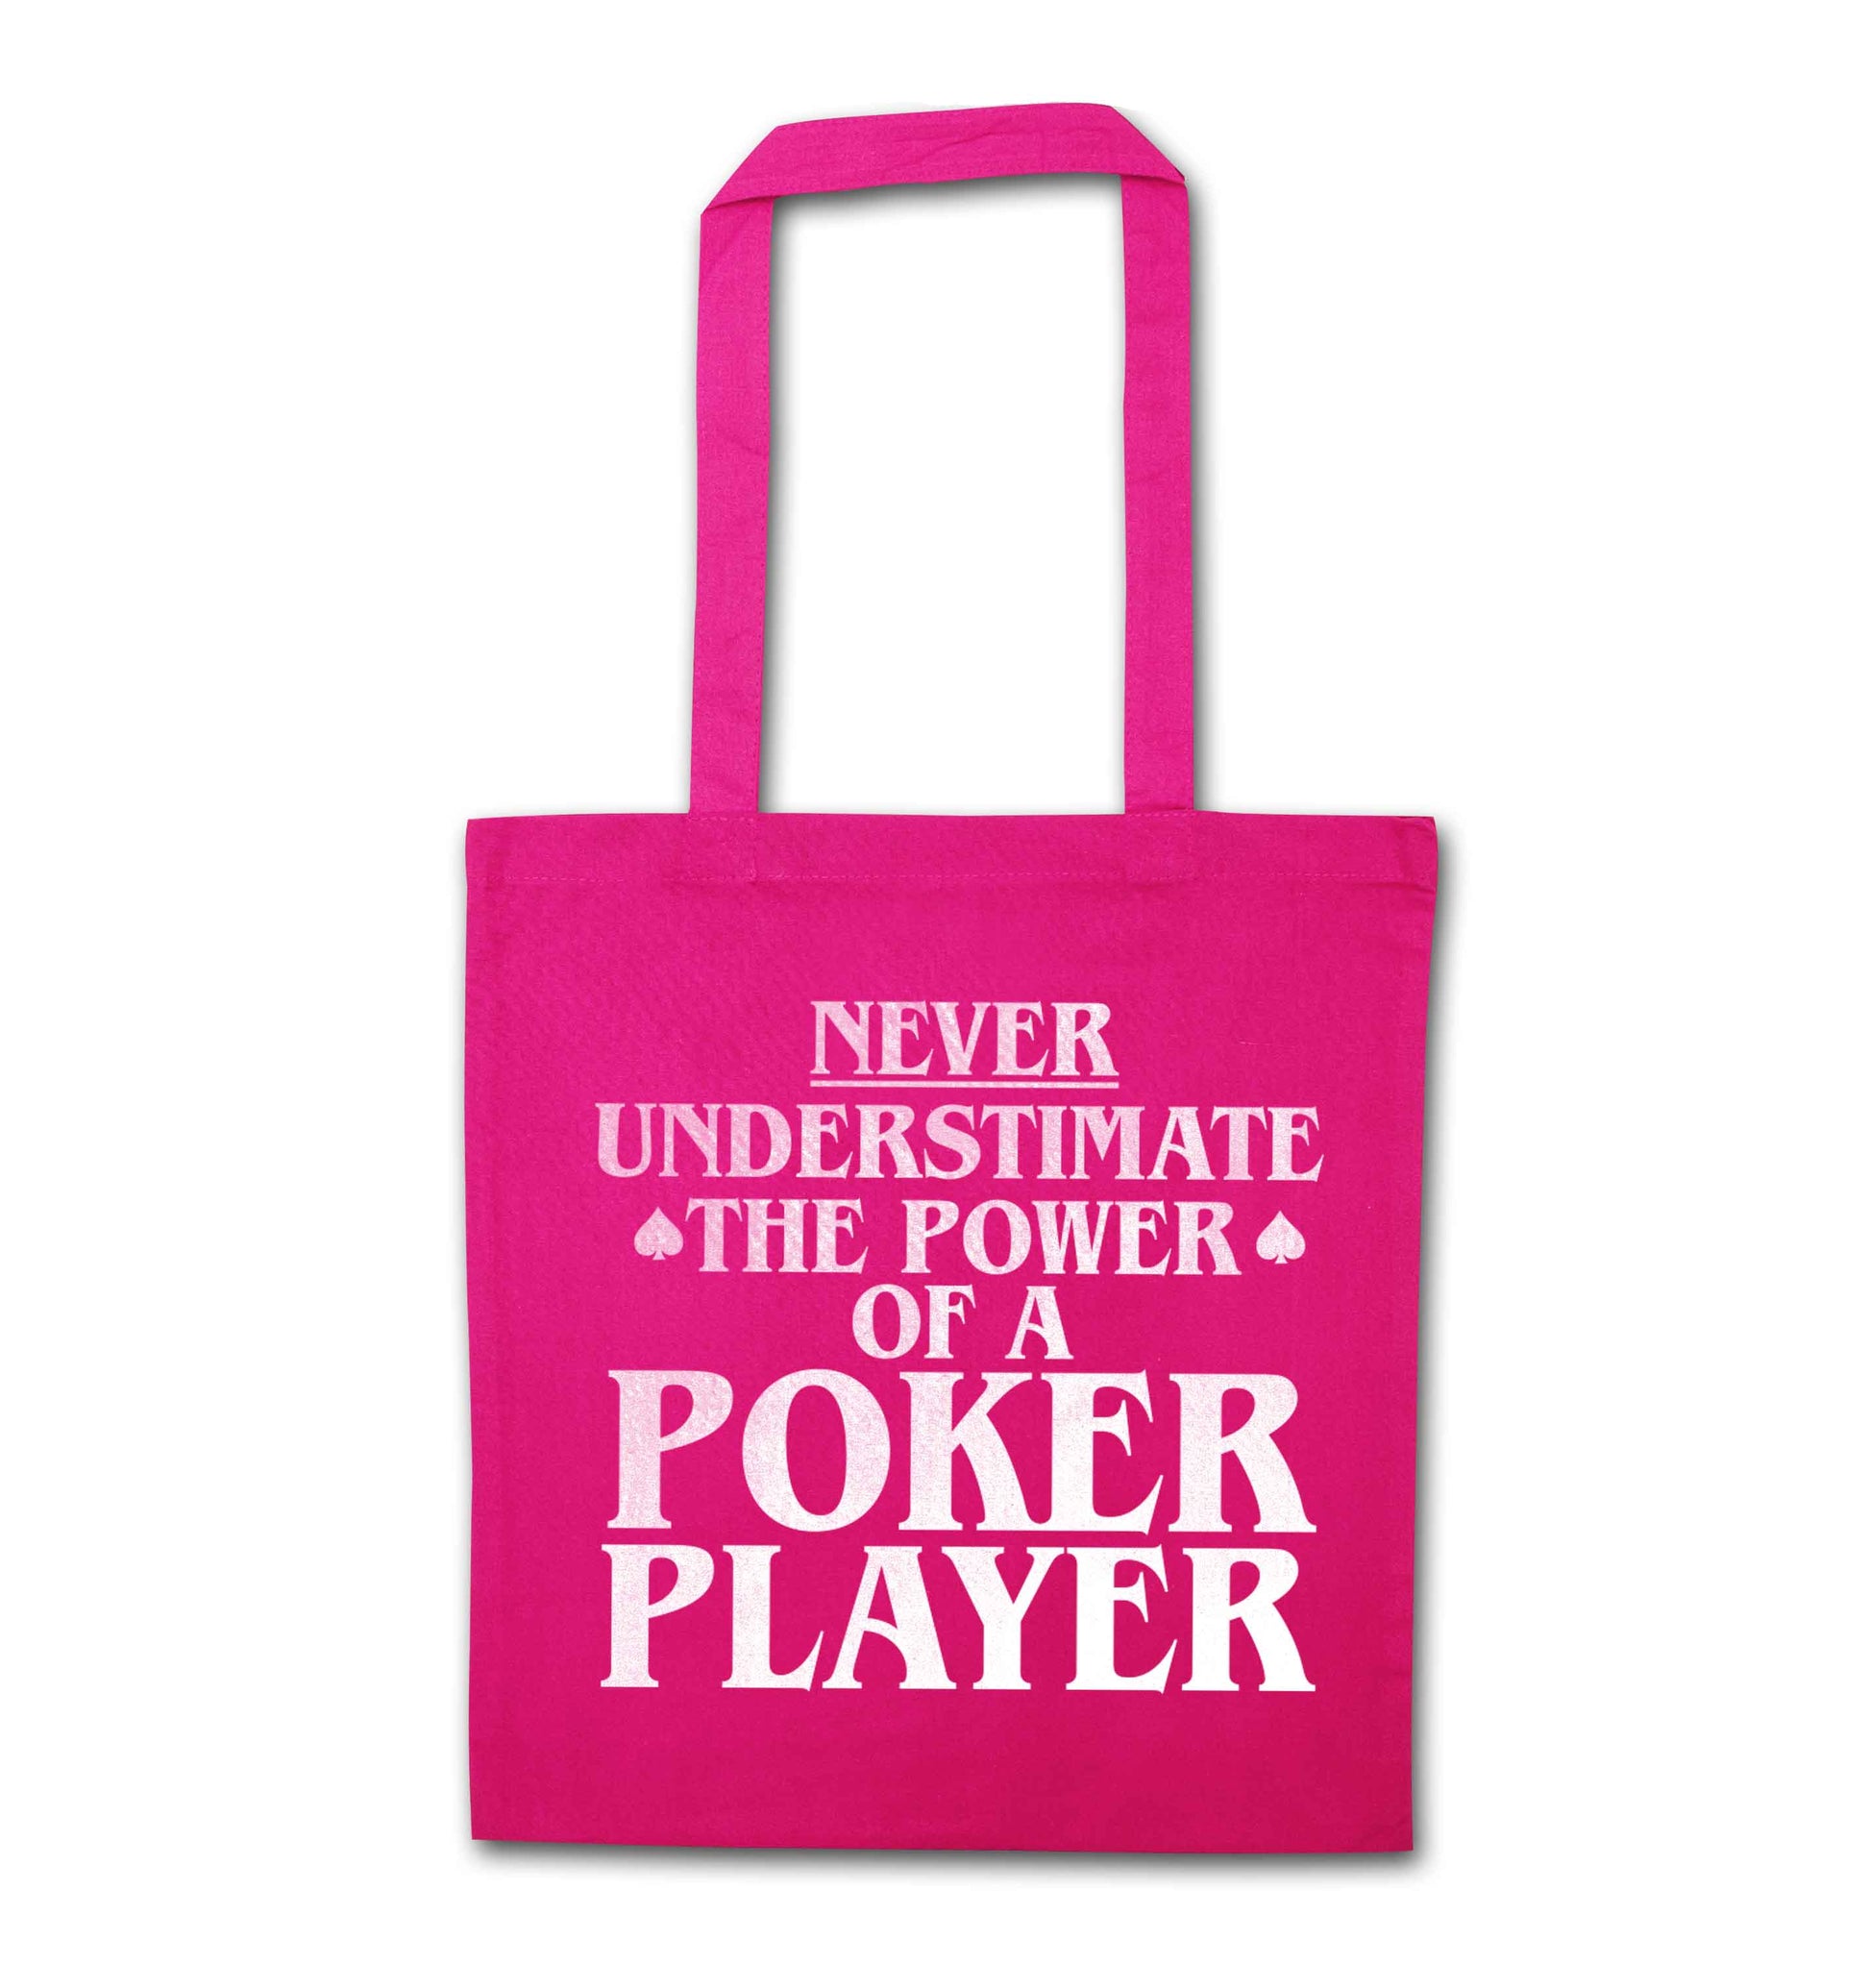 Never understimate the power of a poker player pink tote bag